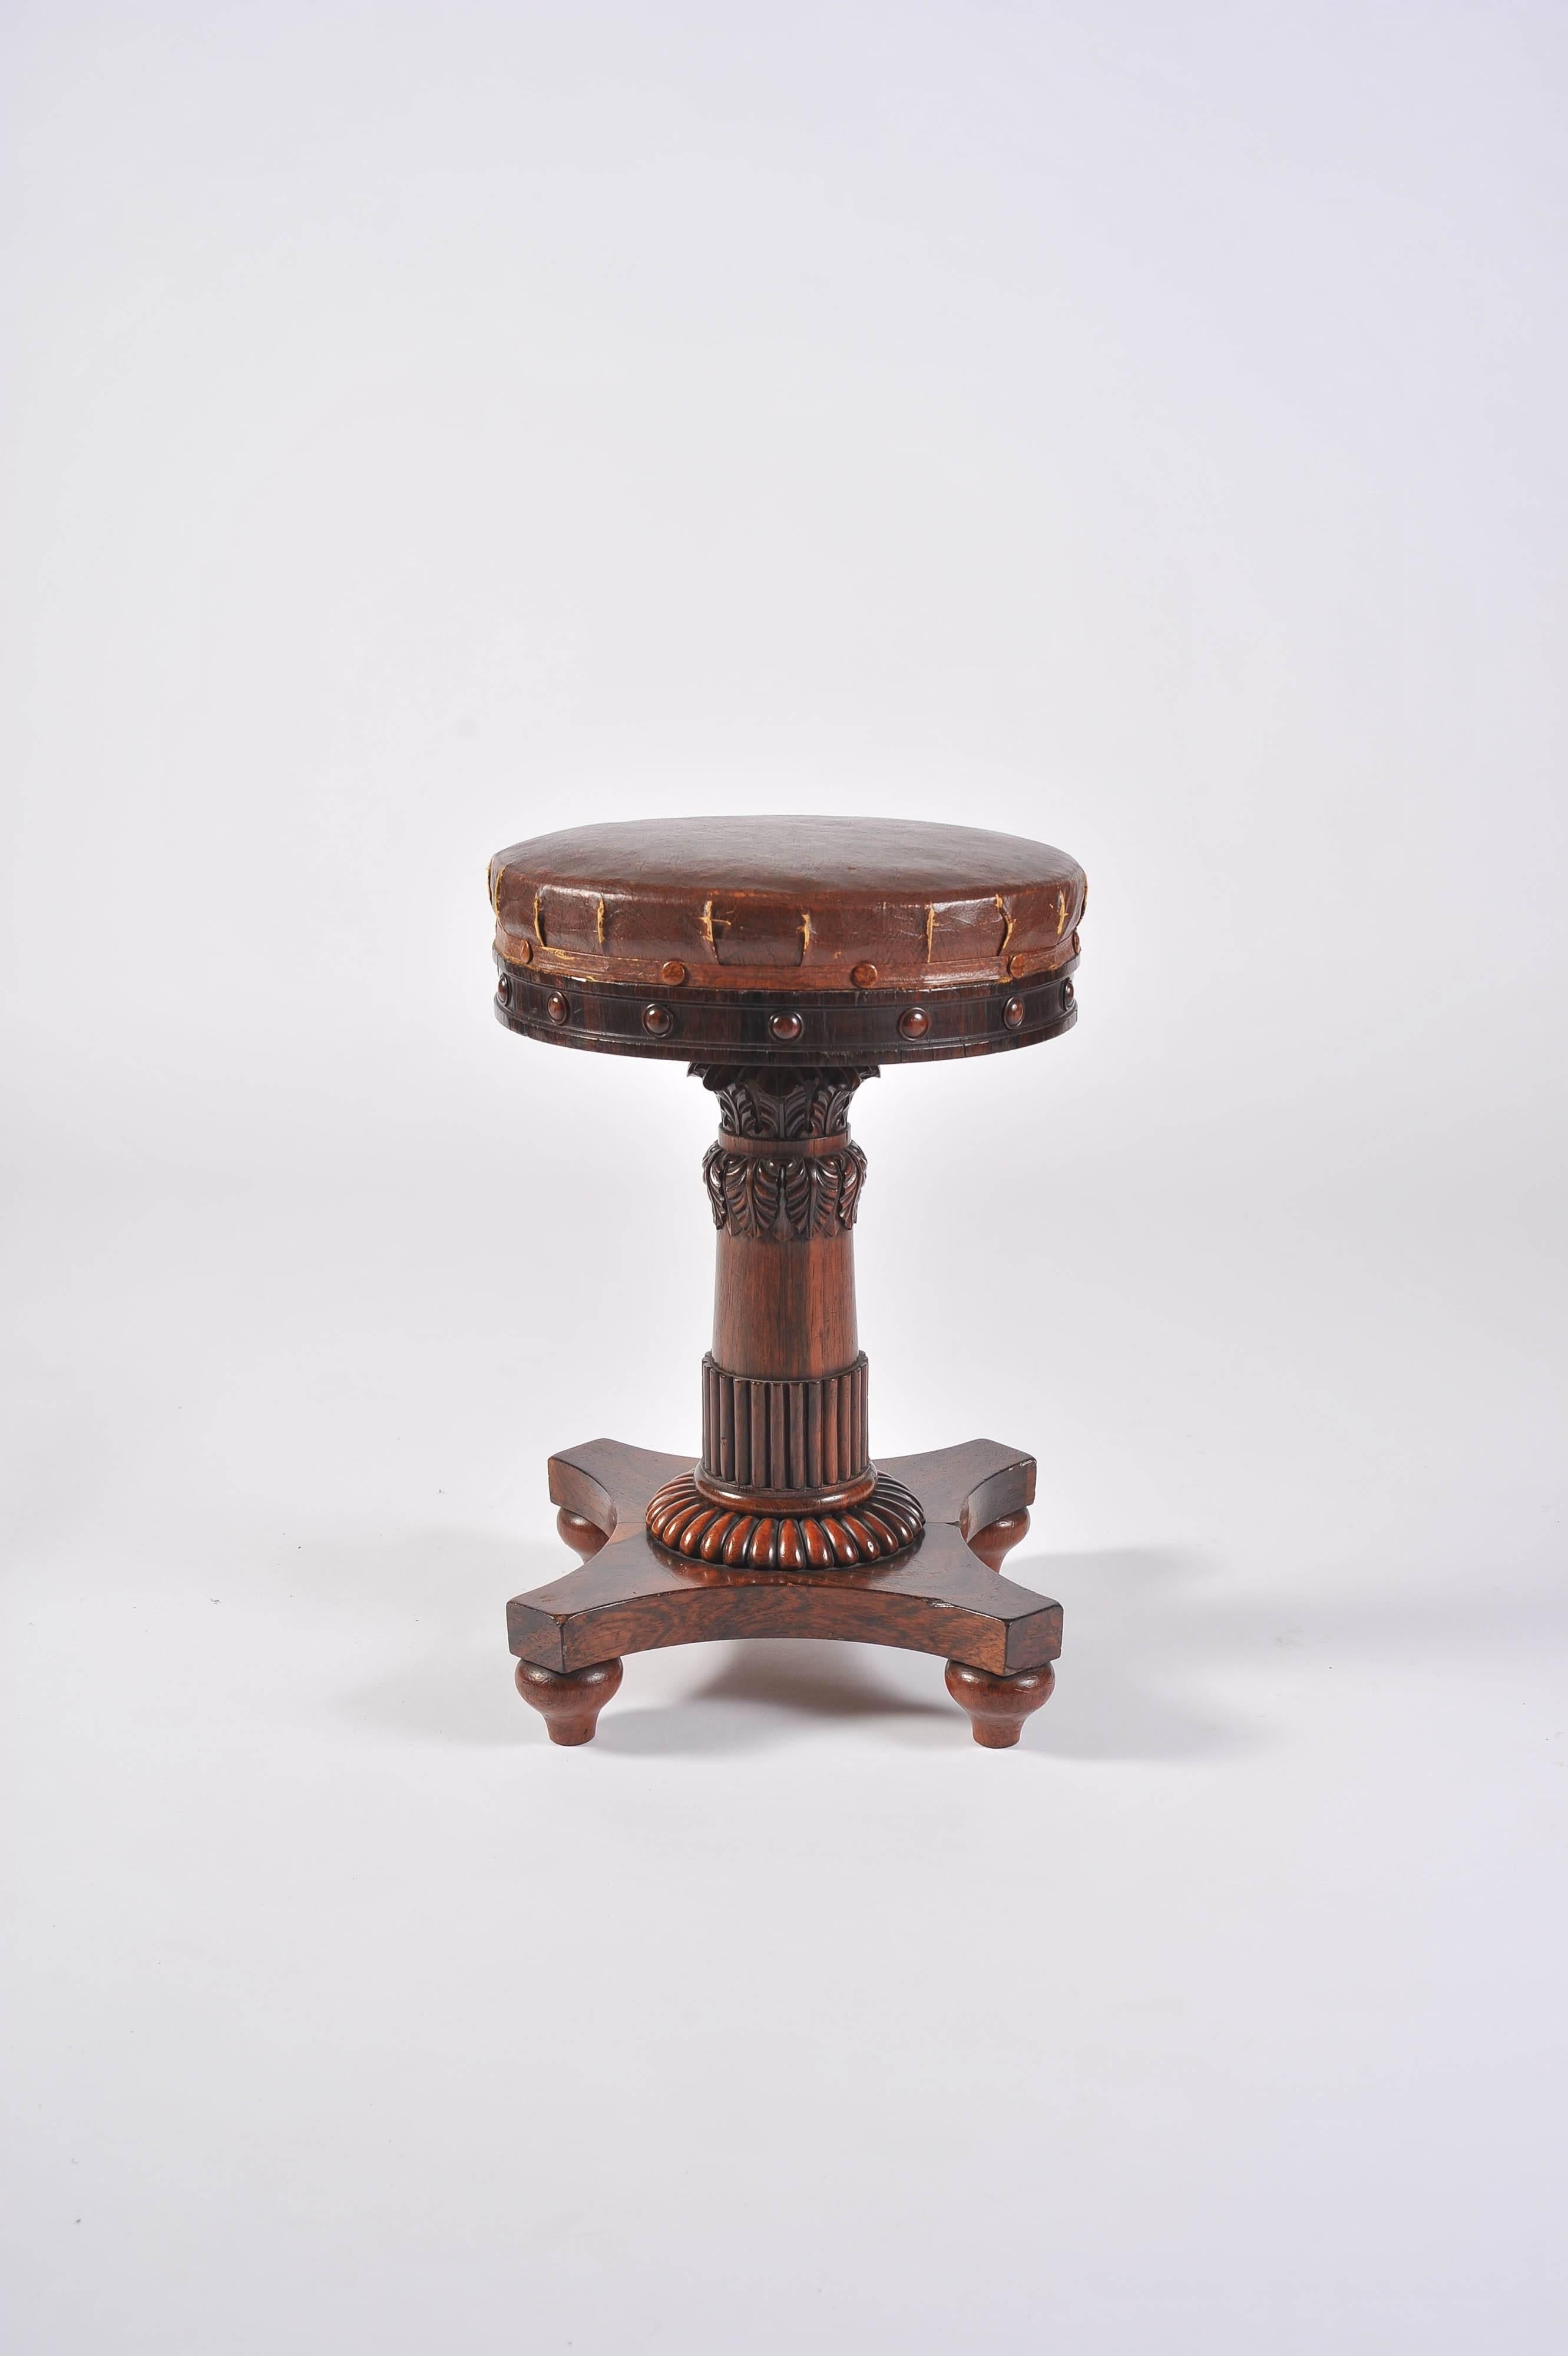 A wonderful Regency period rosewood music stool to designs by George Smith. The adjustable seat, with hand cut steel screw thread, on a turned rosewood stem with gilt metal collar and carved stylised acanthus leaf, reeding and gadrooning on a